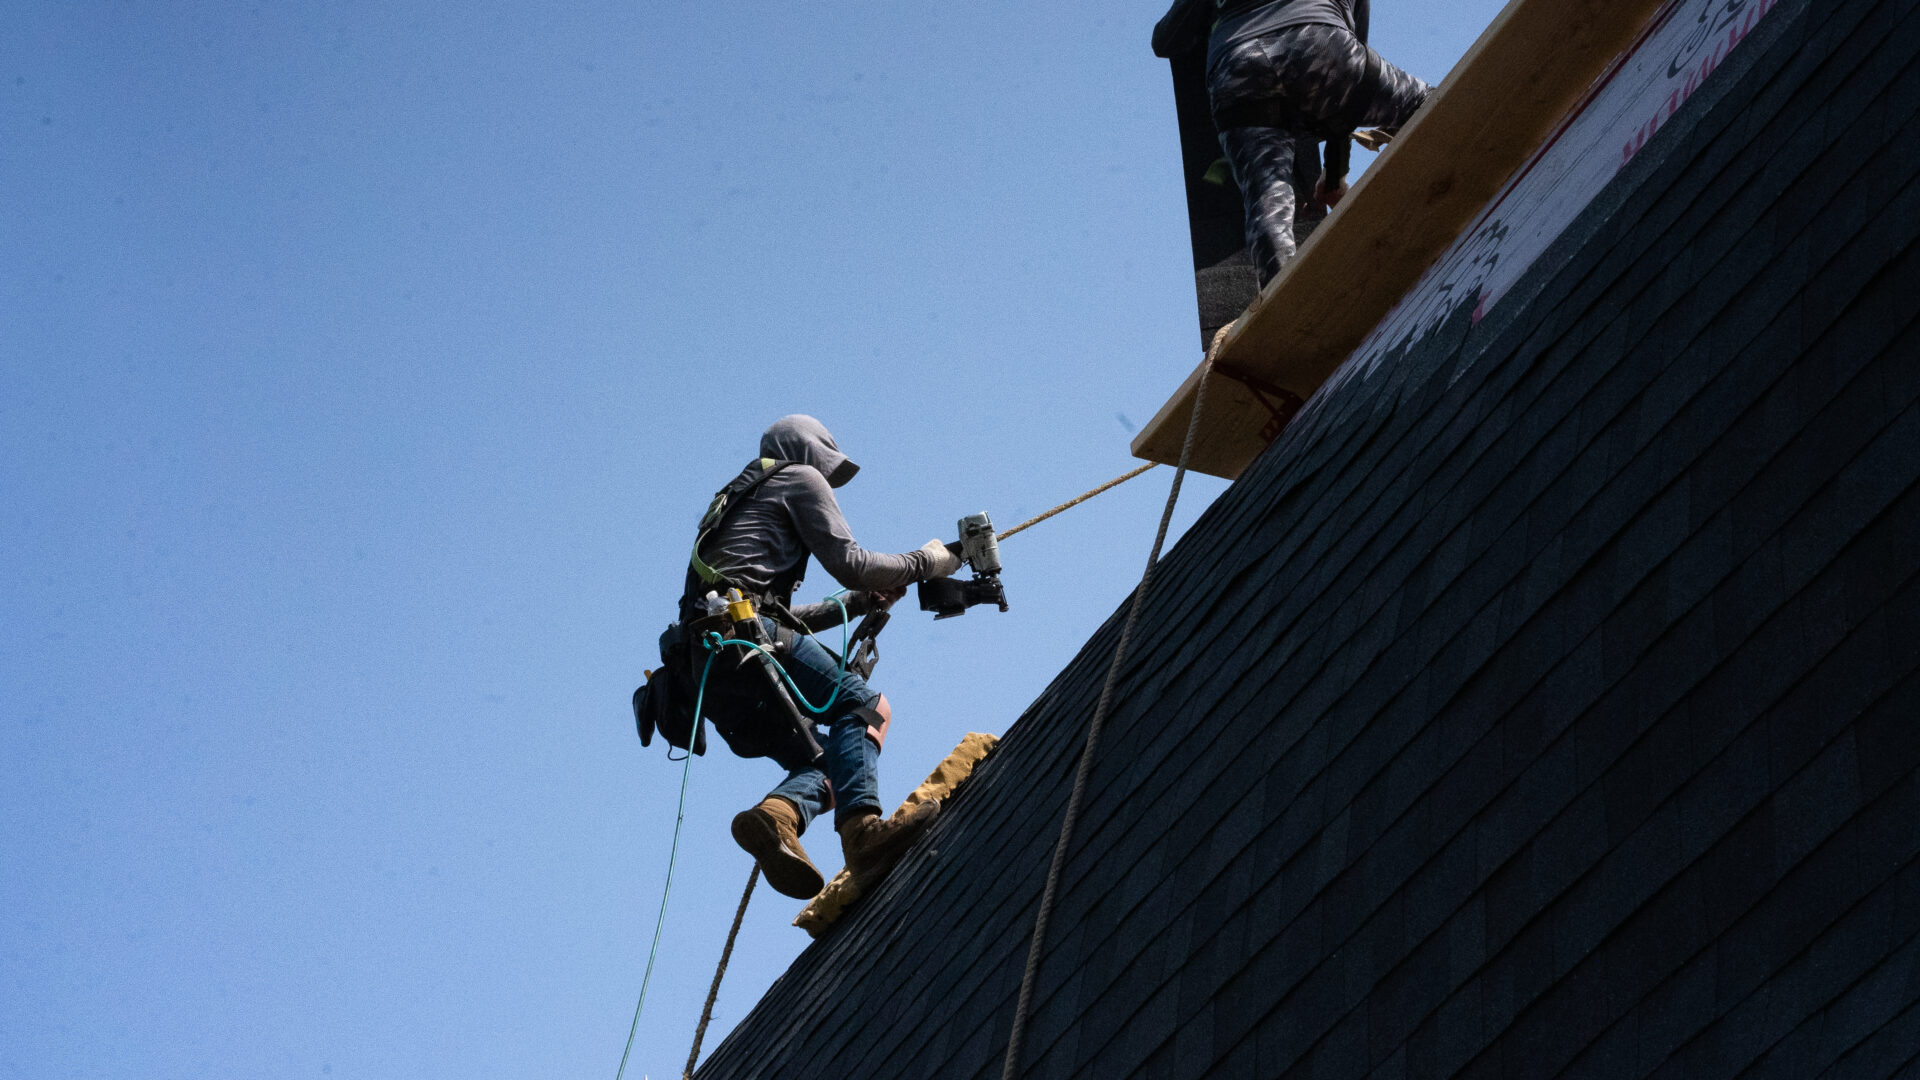 Roofer using a personal fall arrest system (PFAS) while working on a roof